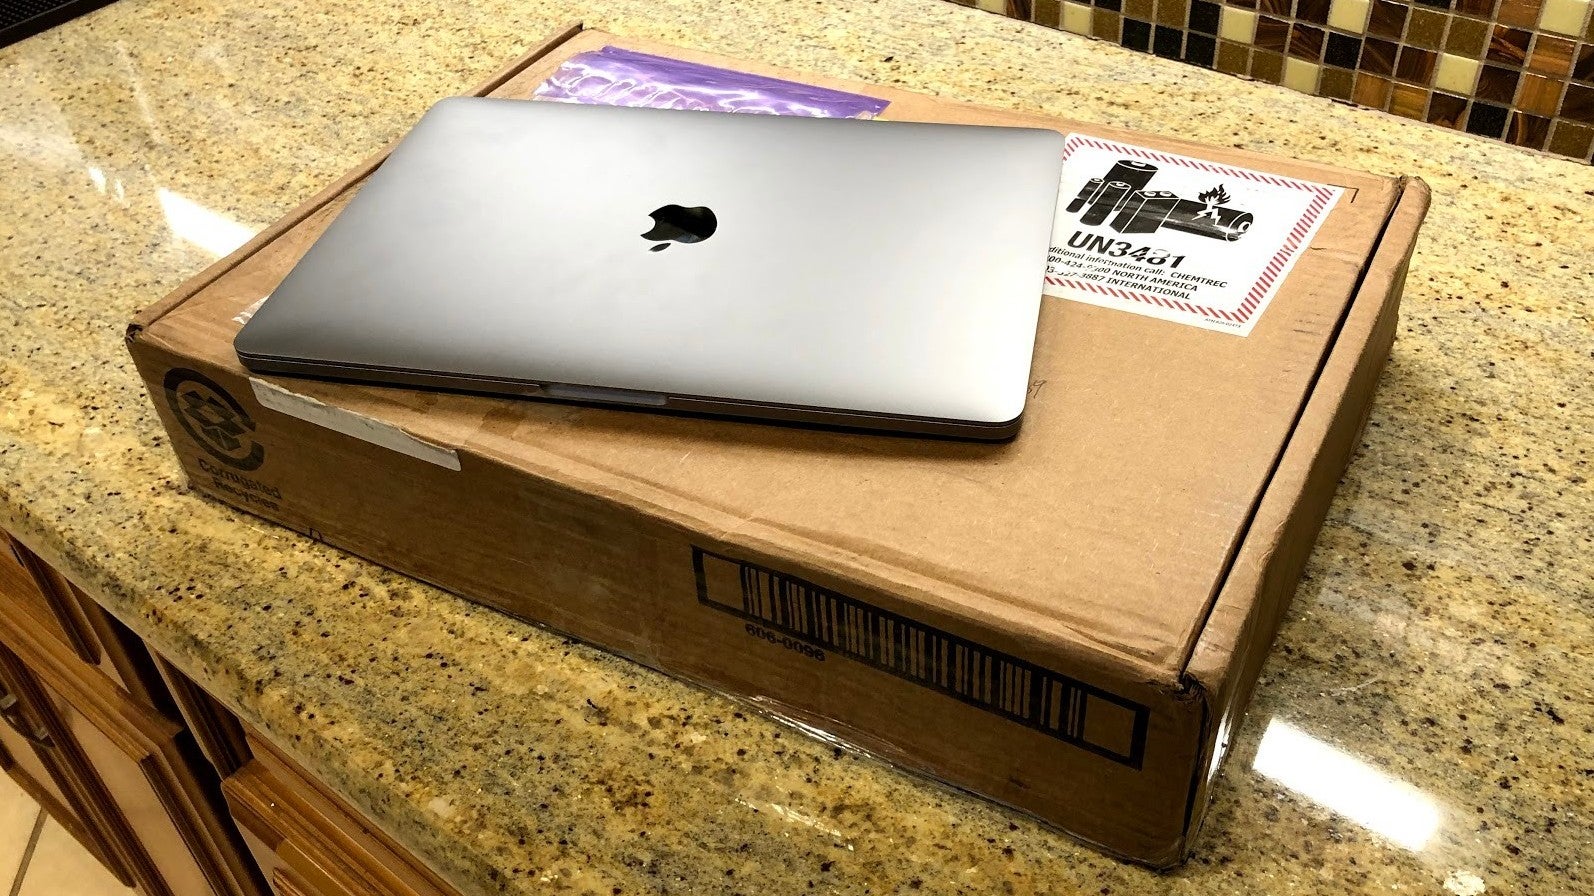 How To Get Your MacBook Ready To Sell